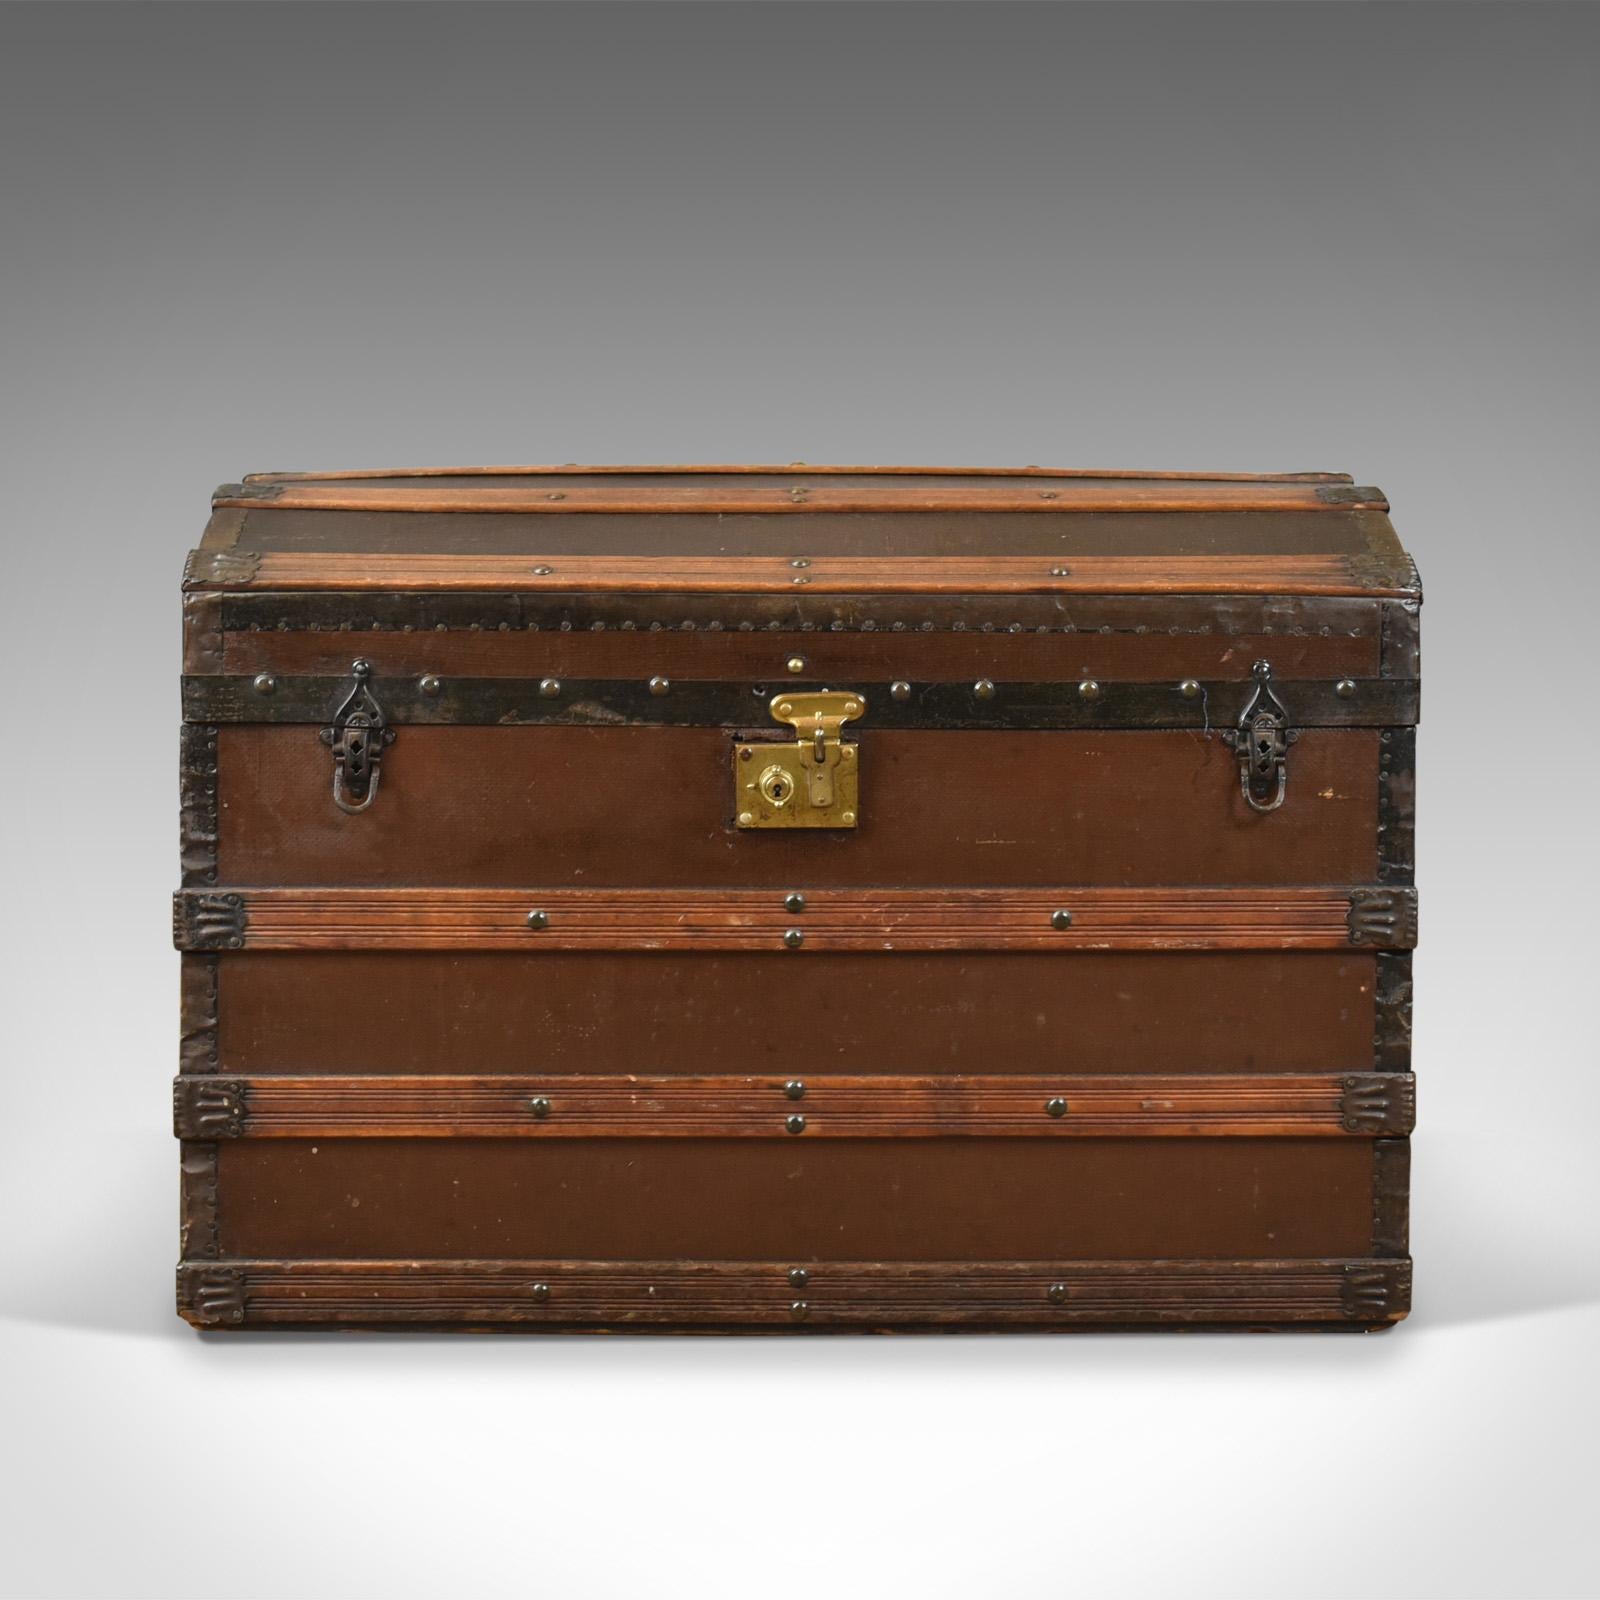 This is an antique carriage chest, an English, Victorian dome topped trunk dating to the late 19th century, circa 1890.

Robust outer construction strapped with wooden lathes
Flip clasps to the front, clasp operational, key absent
Metal bound